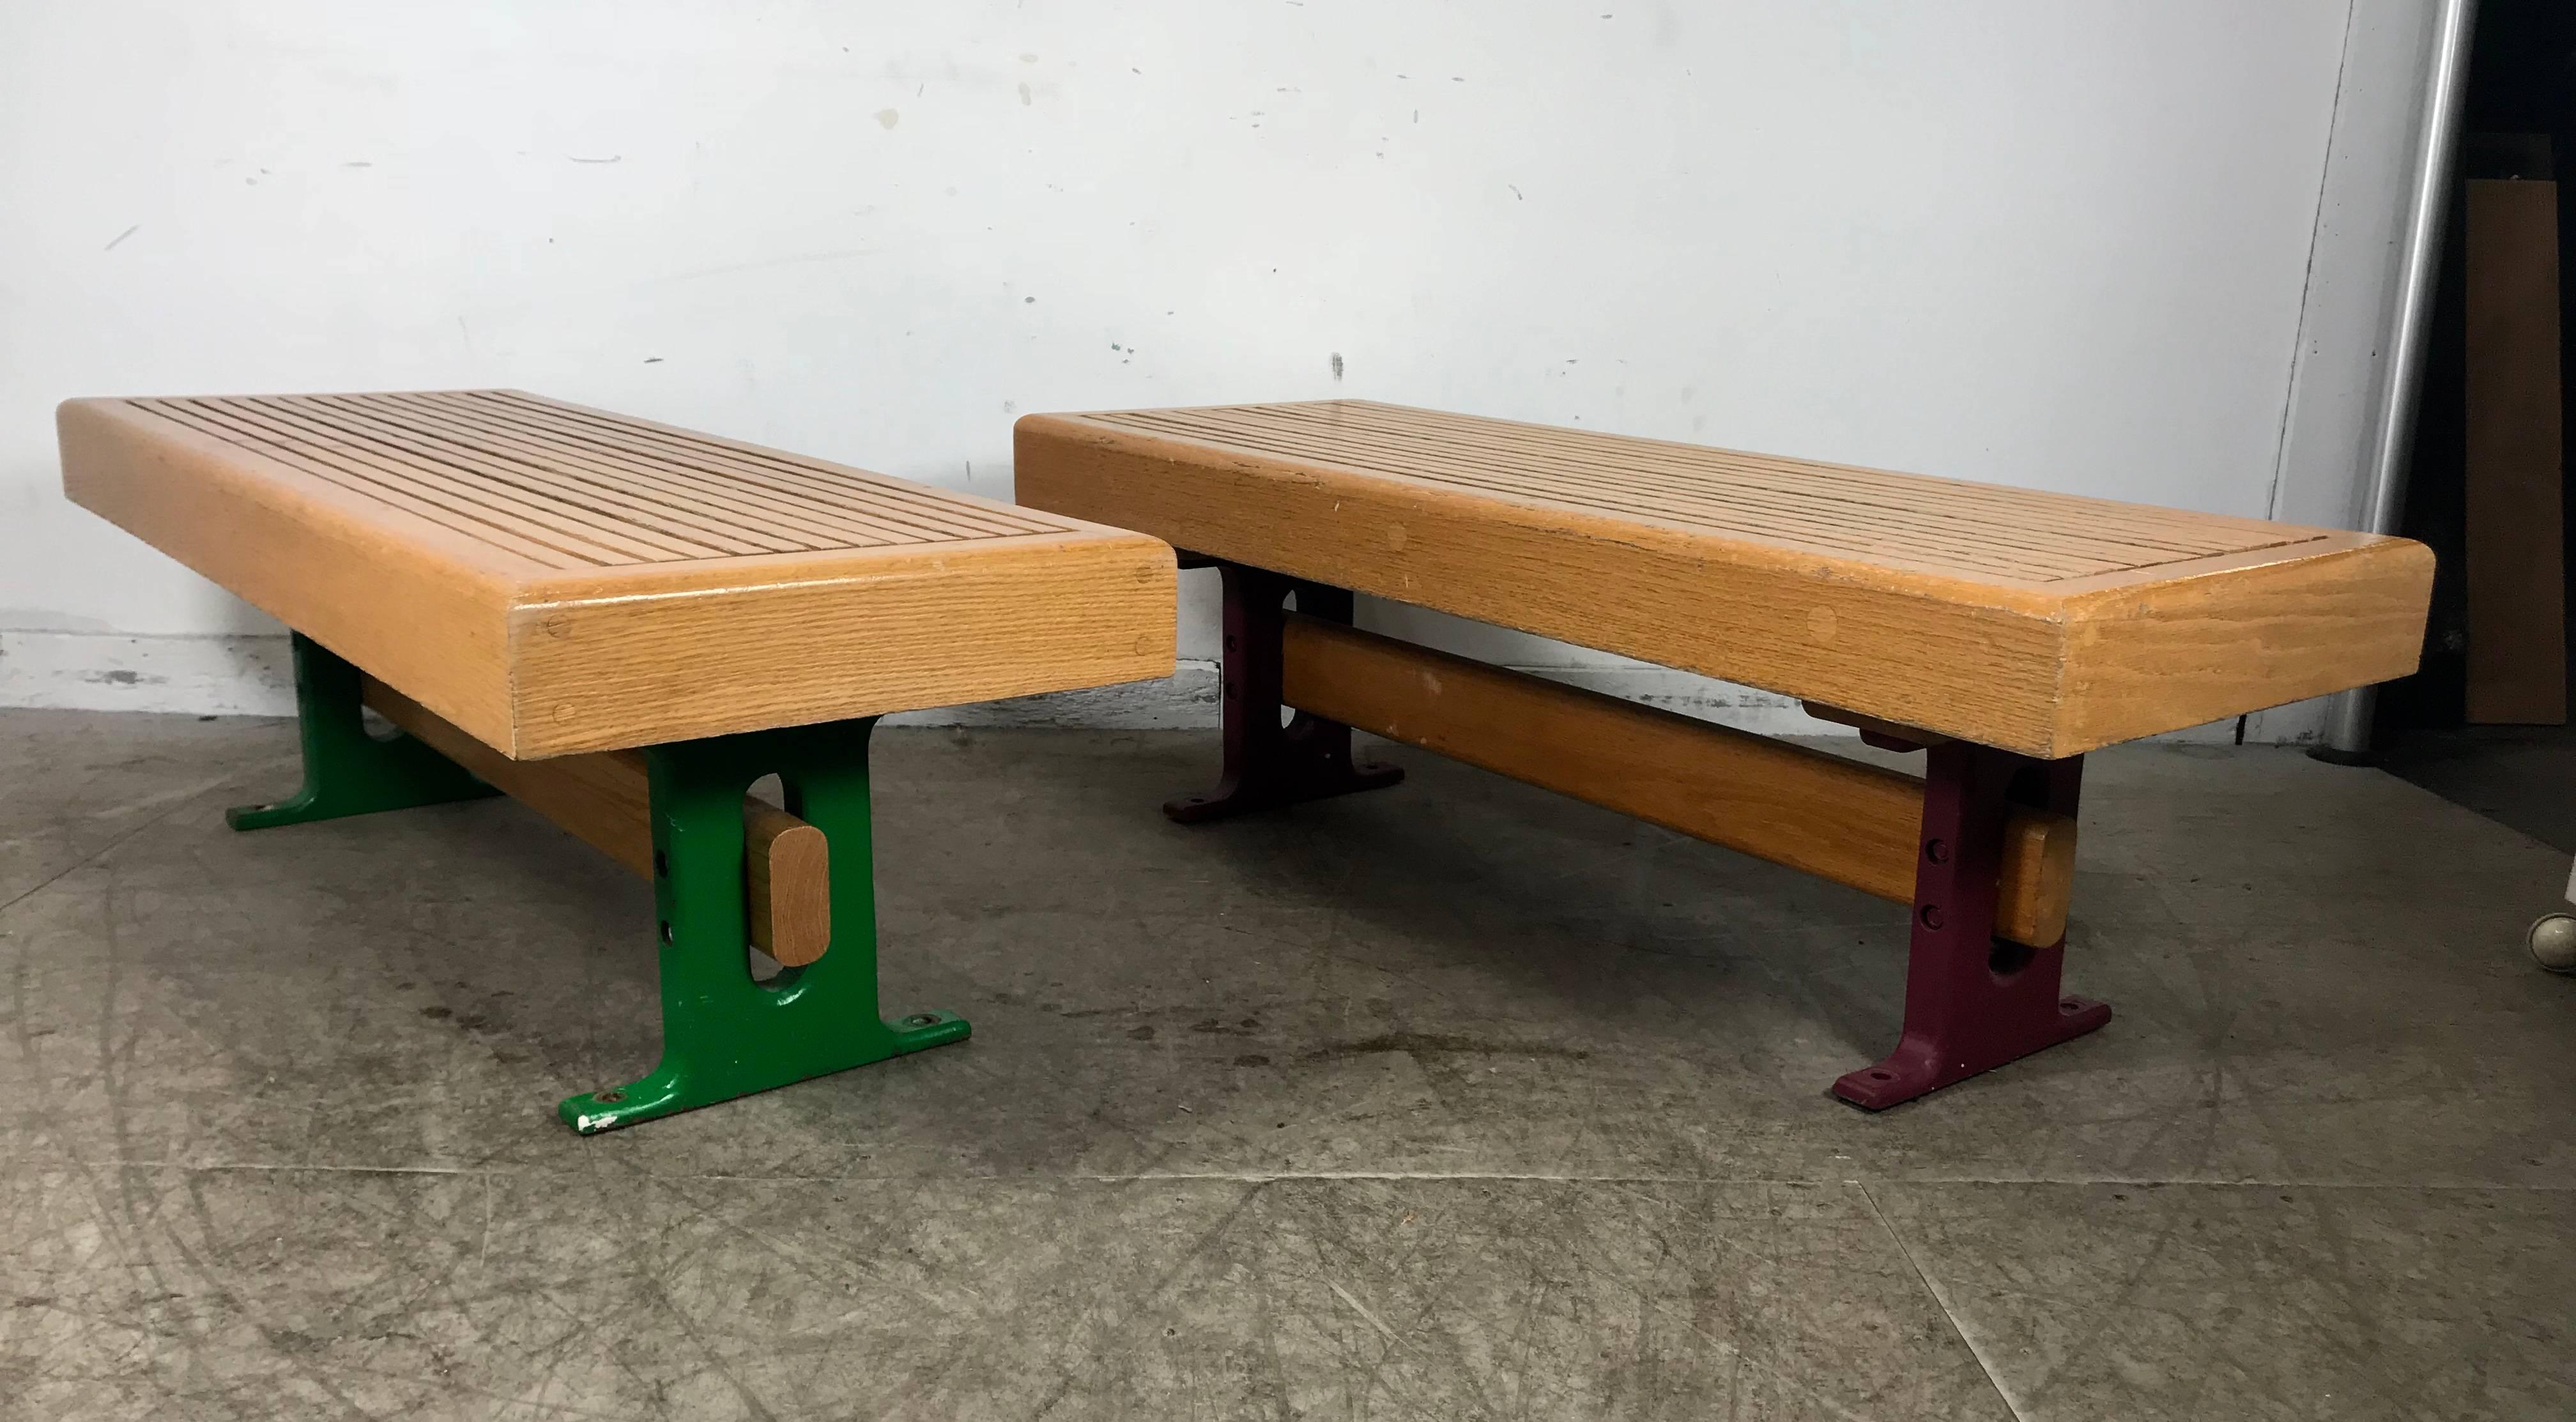 1970s modernist wood and cast iron architectural garden, gallery benches, heavy slat oakwood construction, cast iron bases, Industrial yet elegant design.